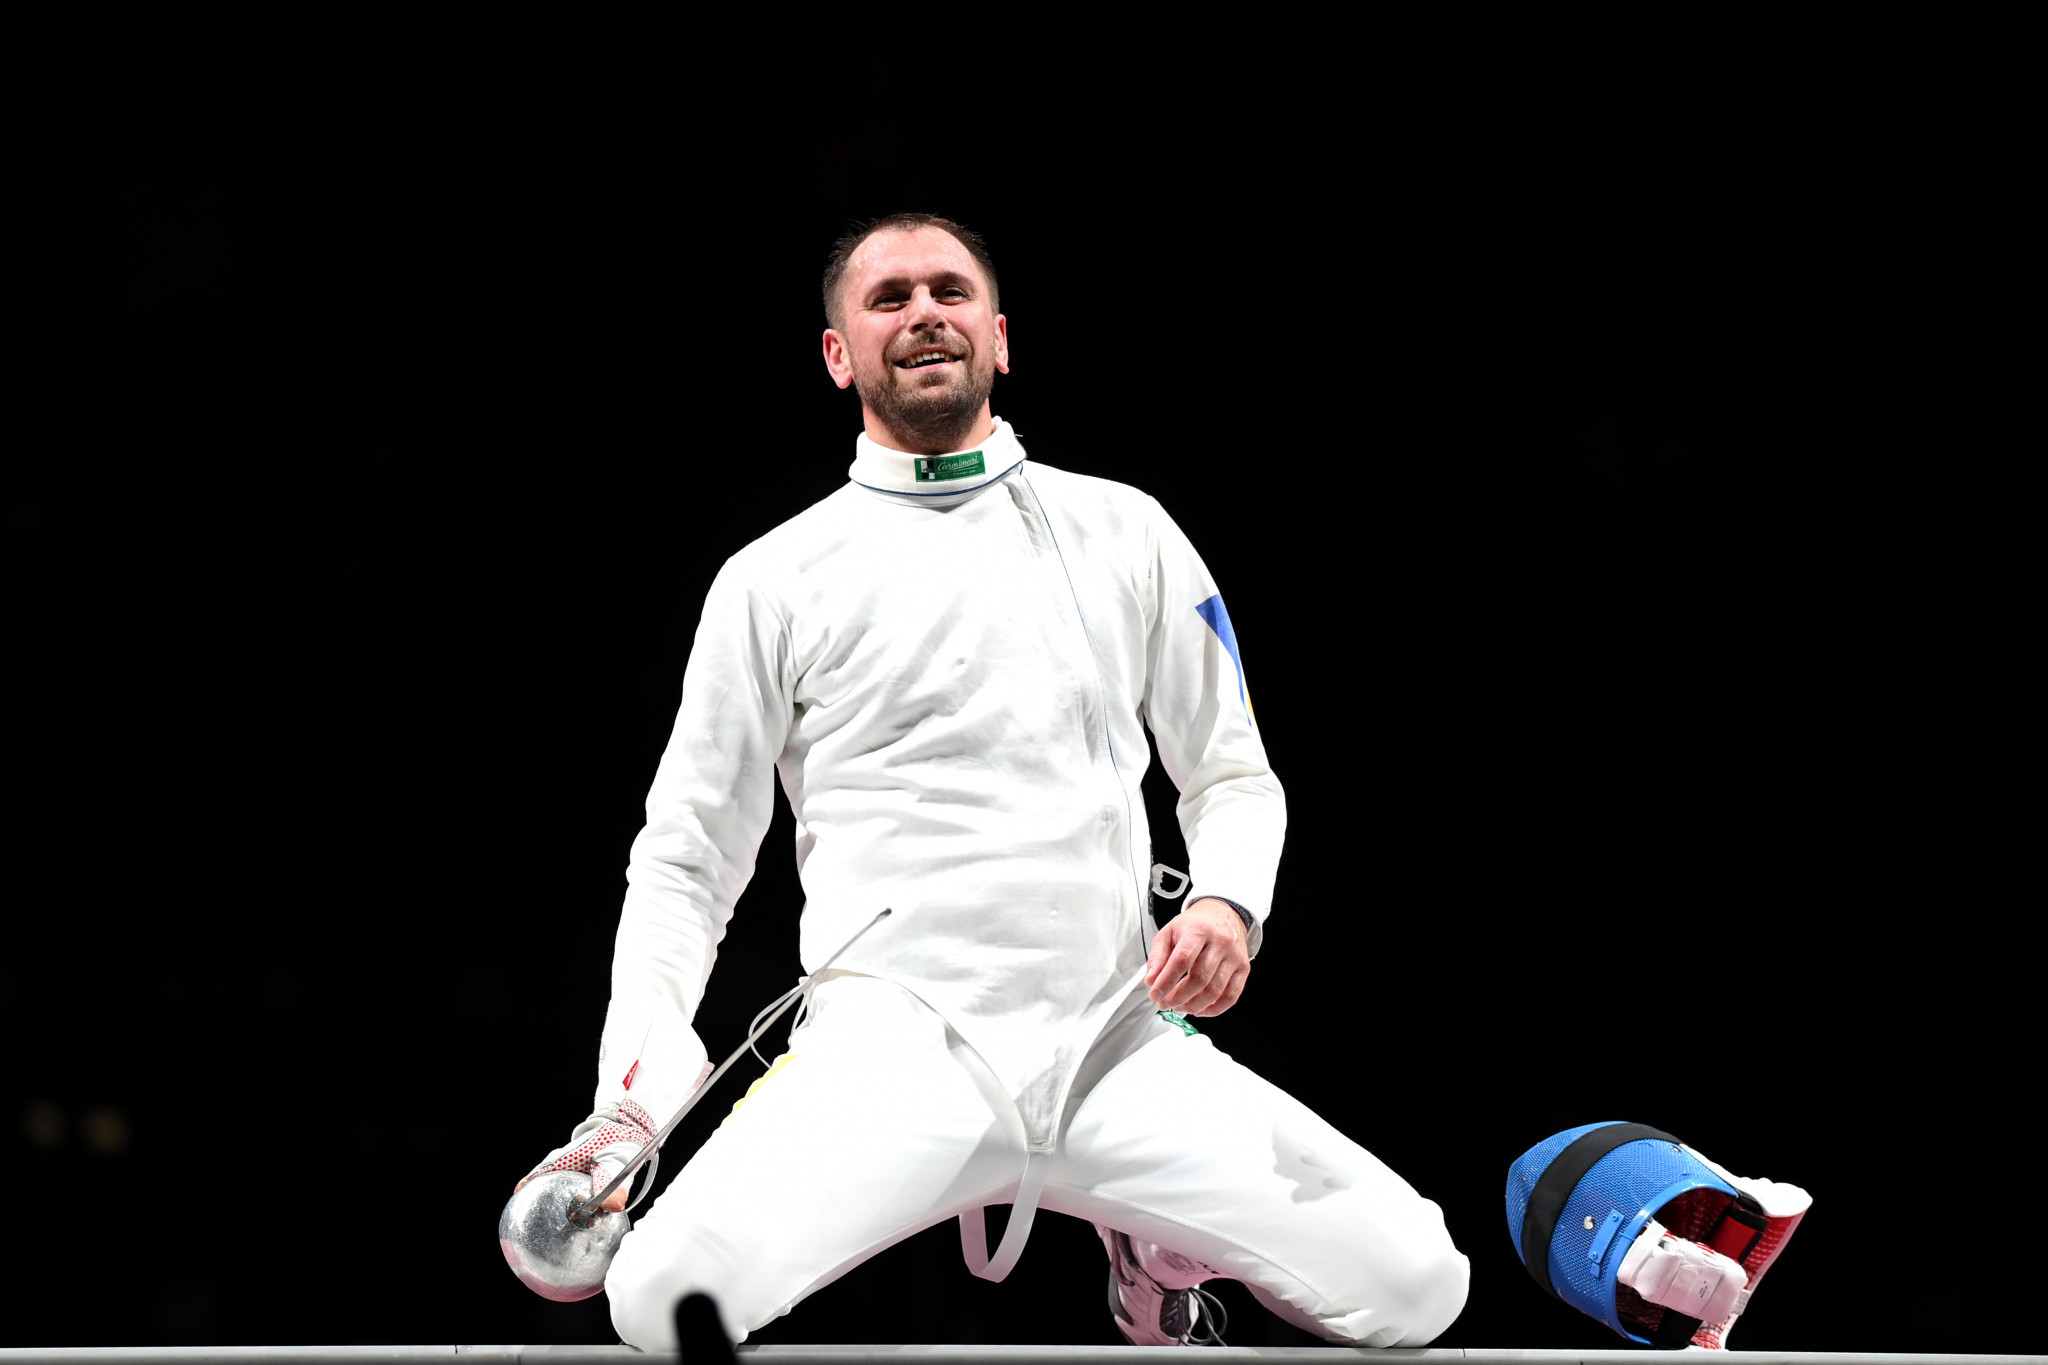 Ukraine's Olympic bronze medallist Ihor Reizlin is on the entry list for the men's épée, even though the country said it would boycott events featuring Russian and Belarusian athletes ©Getty Images